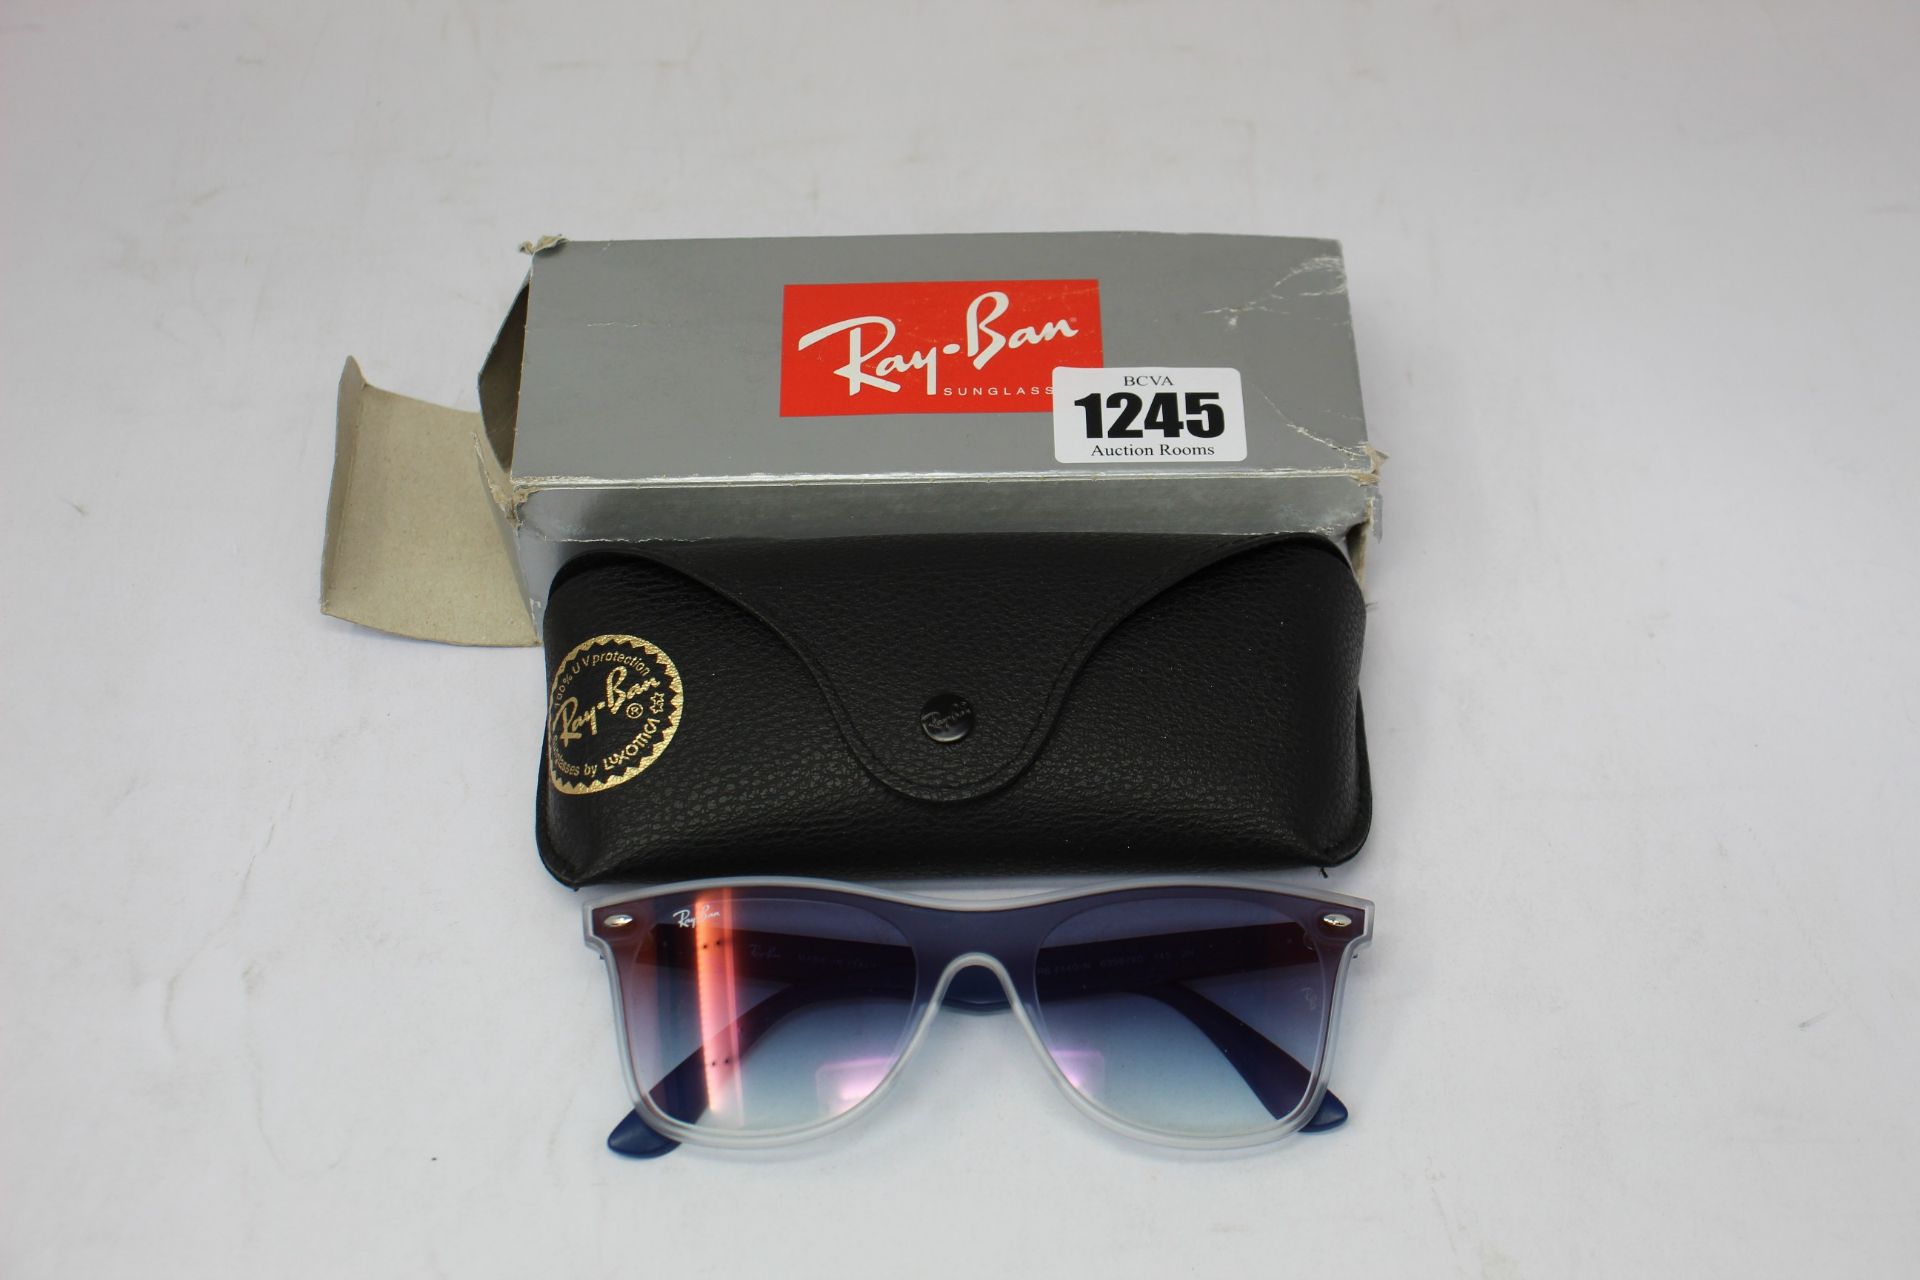 A pair of as new Ray Ban sunglasses.